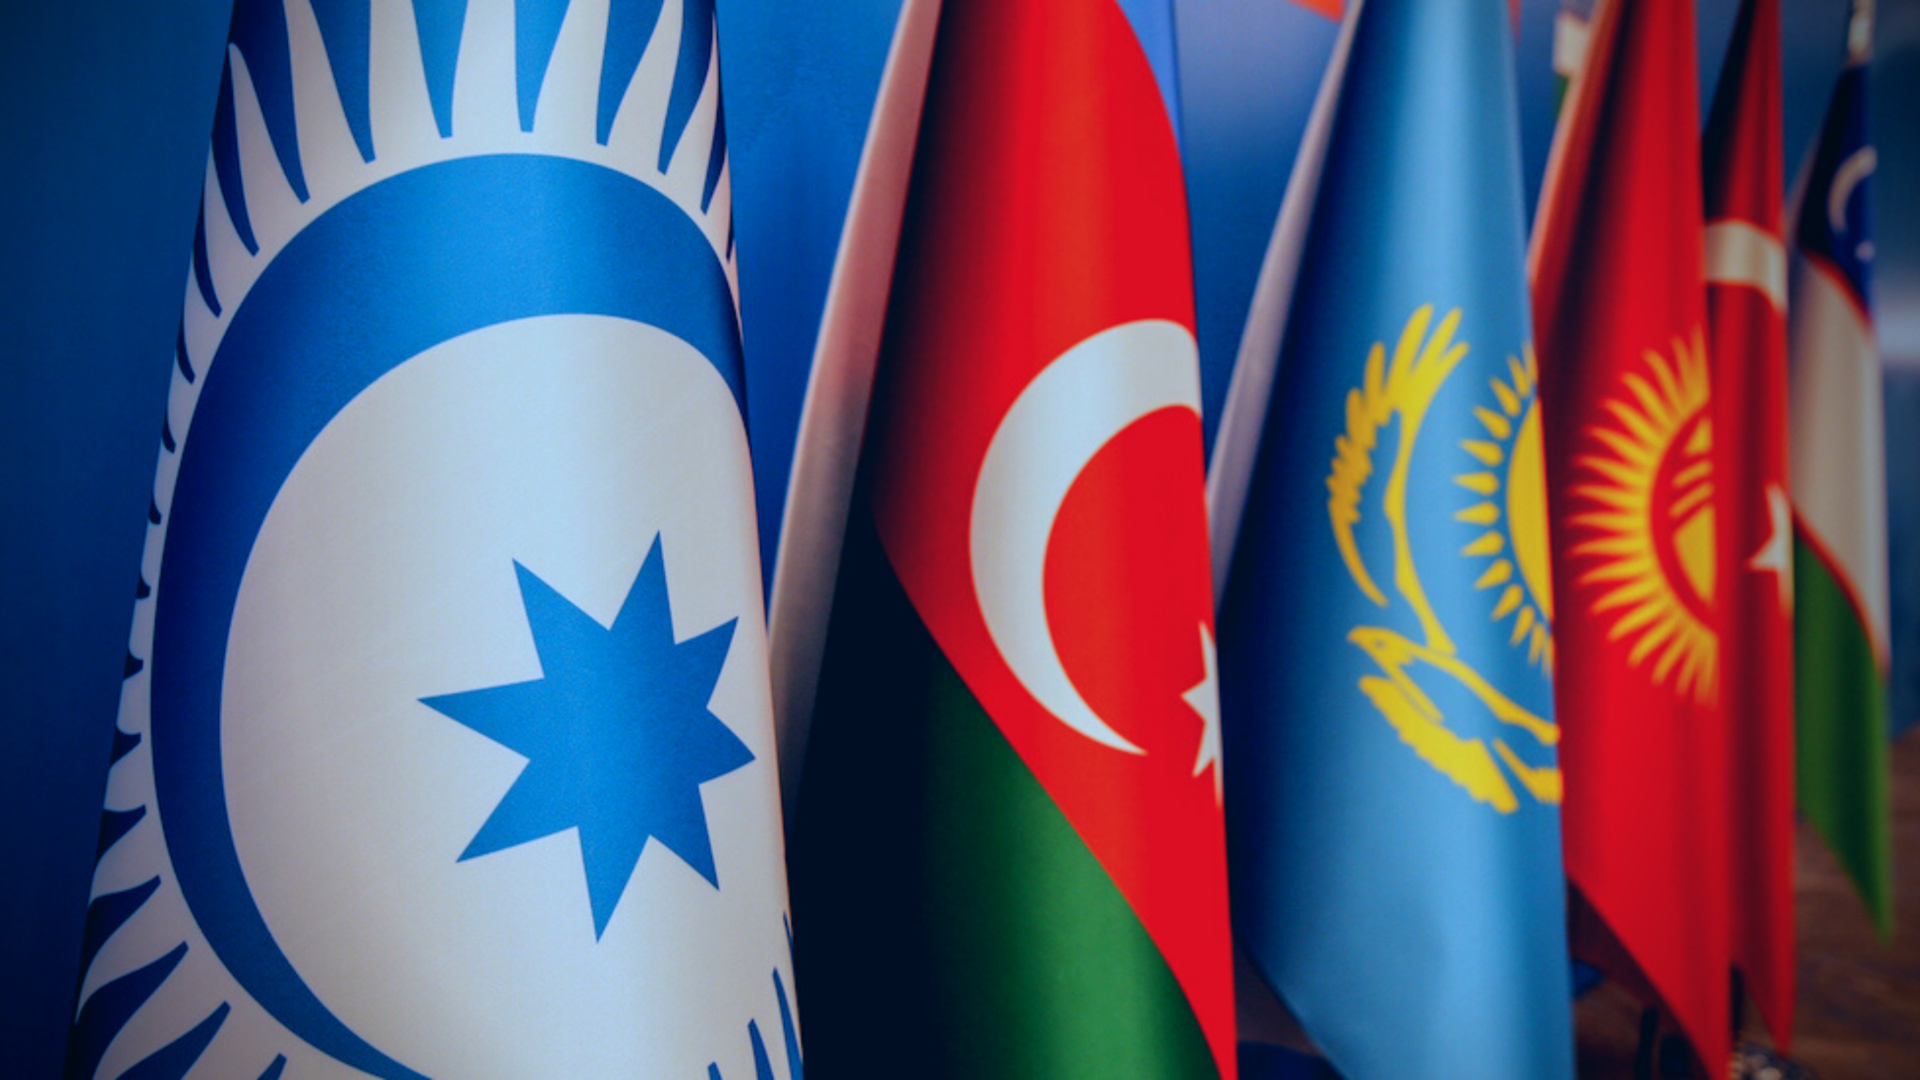 Azerbaijan's cooperation with Turkic states has potential to enhance regional stability